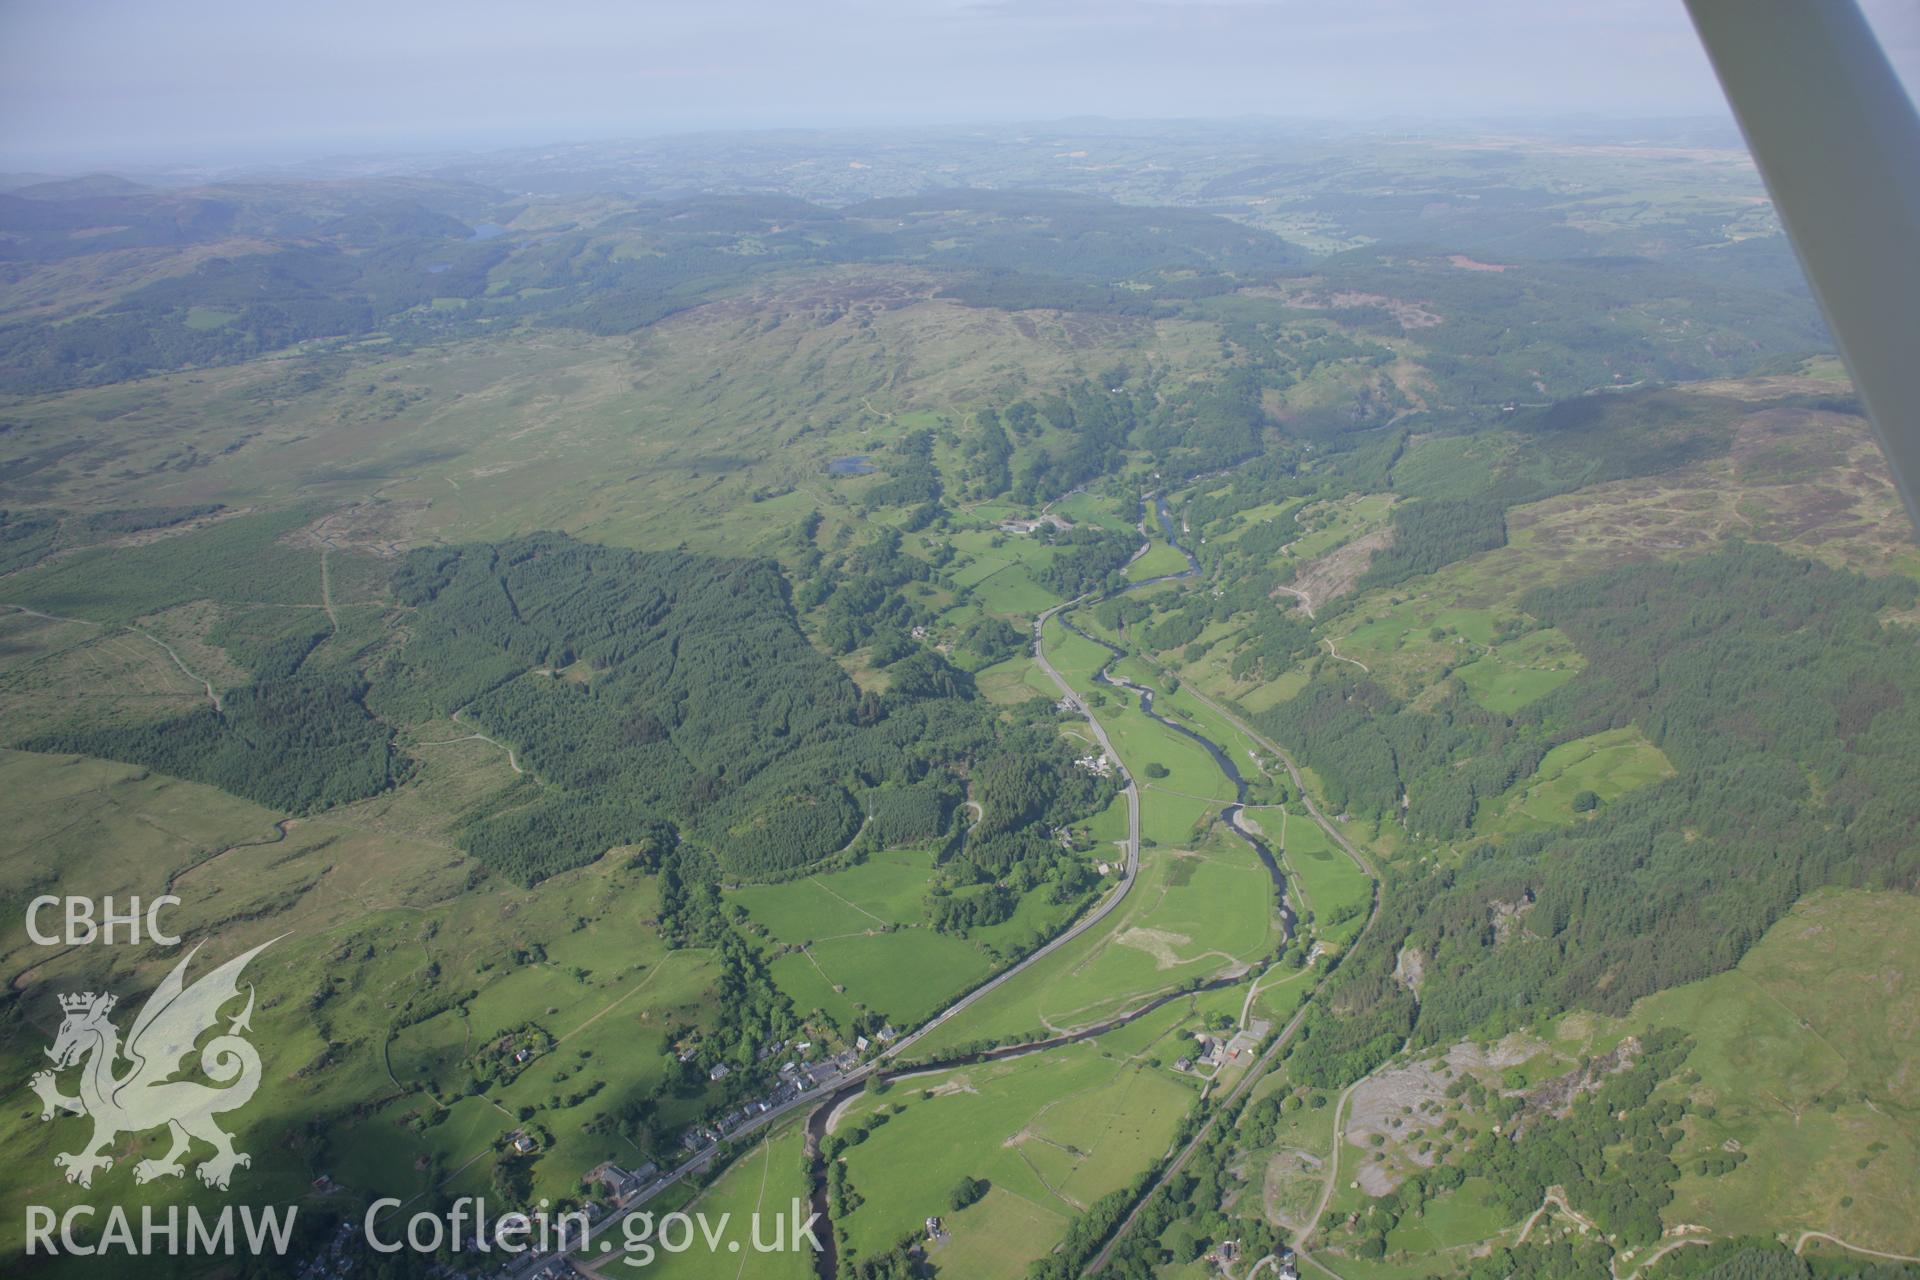 RCAHMW colour oblique aerial photograph of Capel Elen, Dolwyddelan in landscape view looking towards the north-east. Taken on 14 June 2006 by Toby Driver